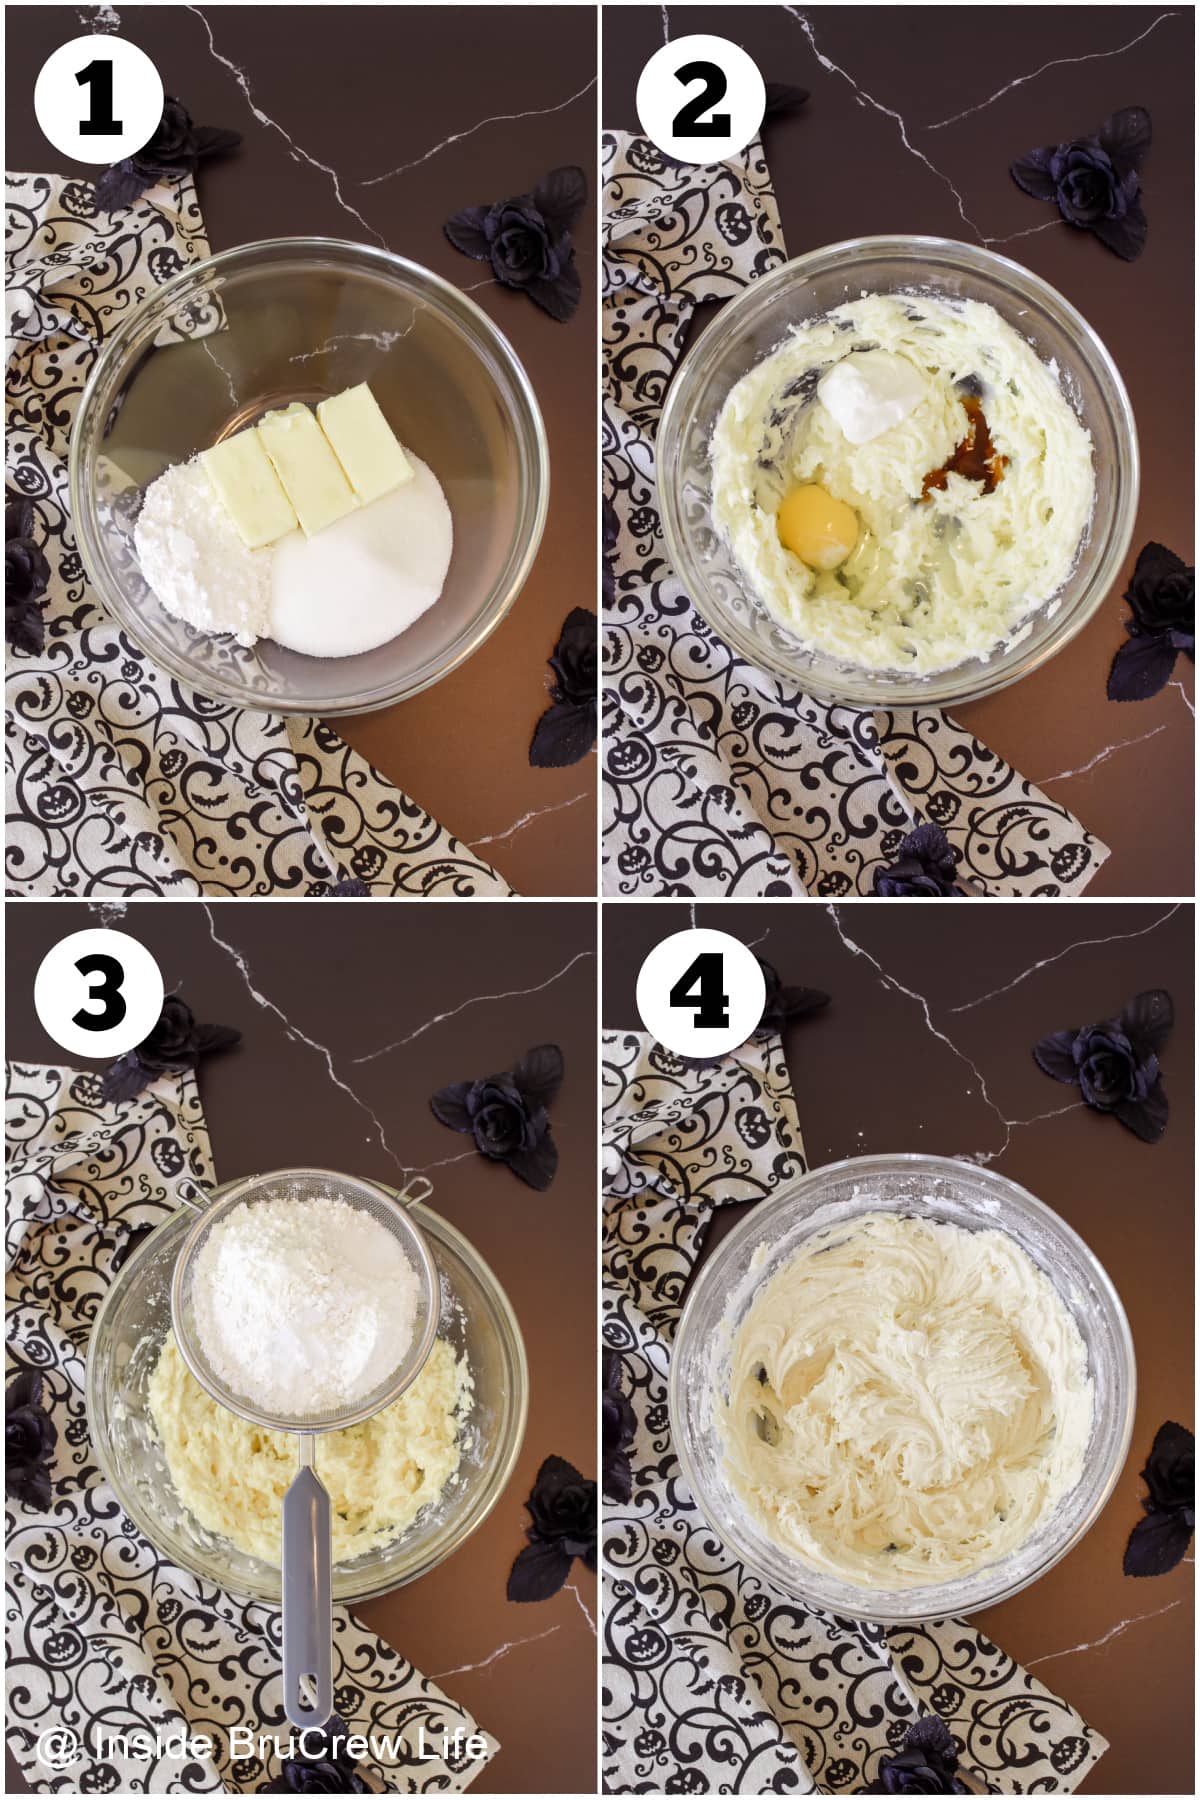 Four pictures together showing how to make cookie dough.